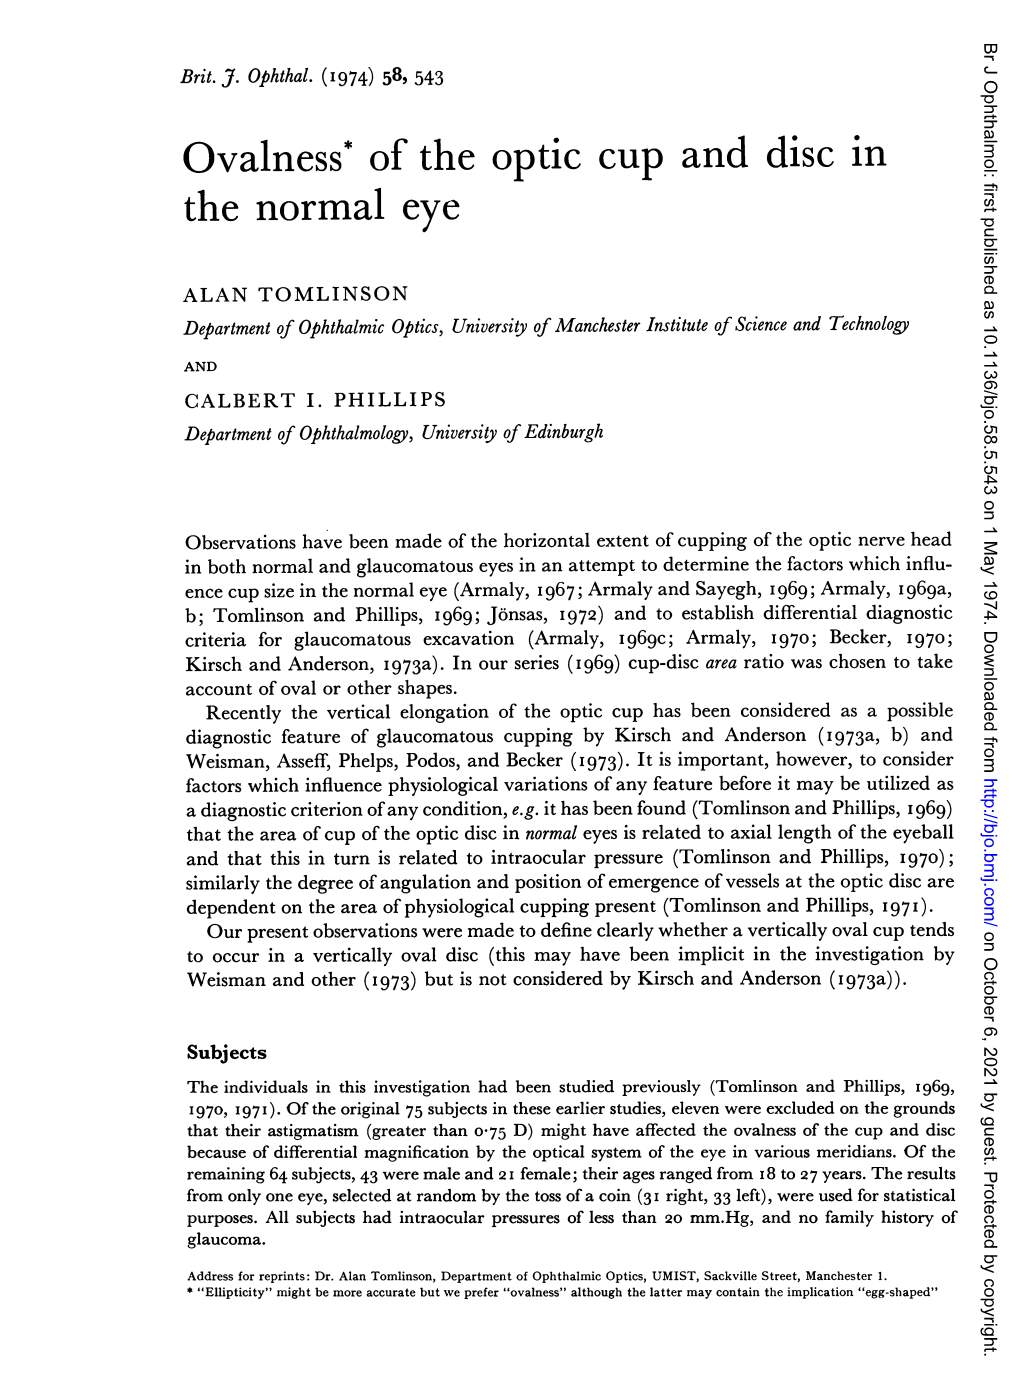 Ovalness* of the Optic Cup and Disc in the Normal Eye